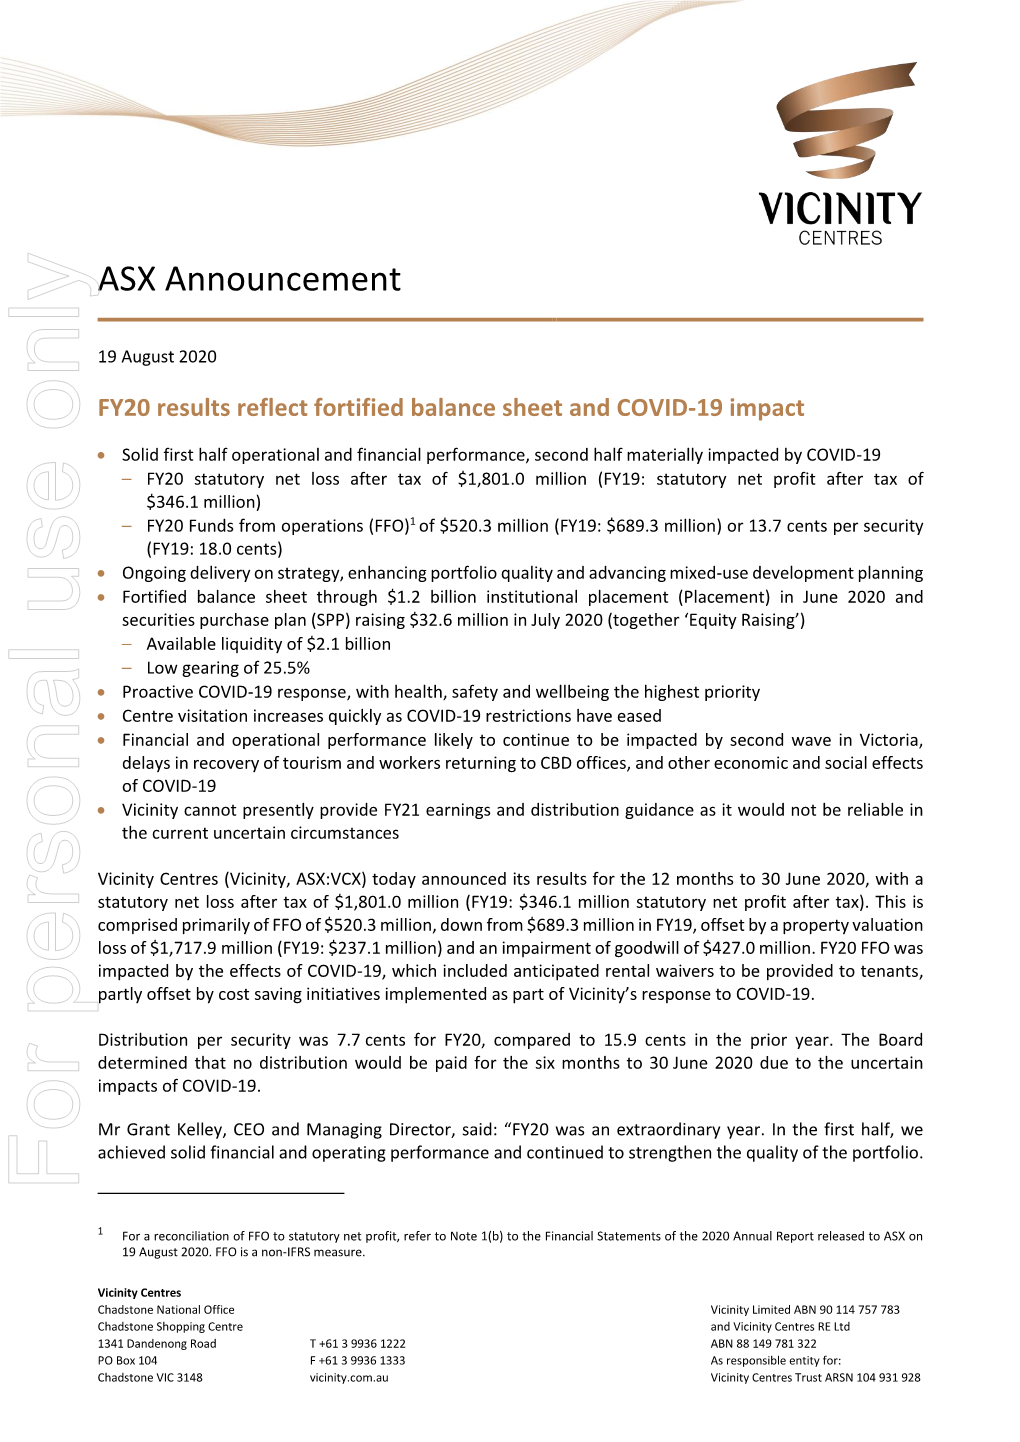 FY20 Results Reflect Fortified Balance Sheet and COVID-19 Impact